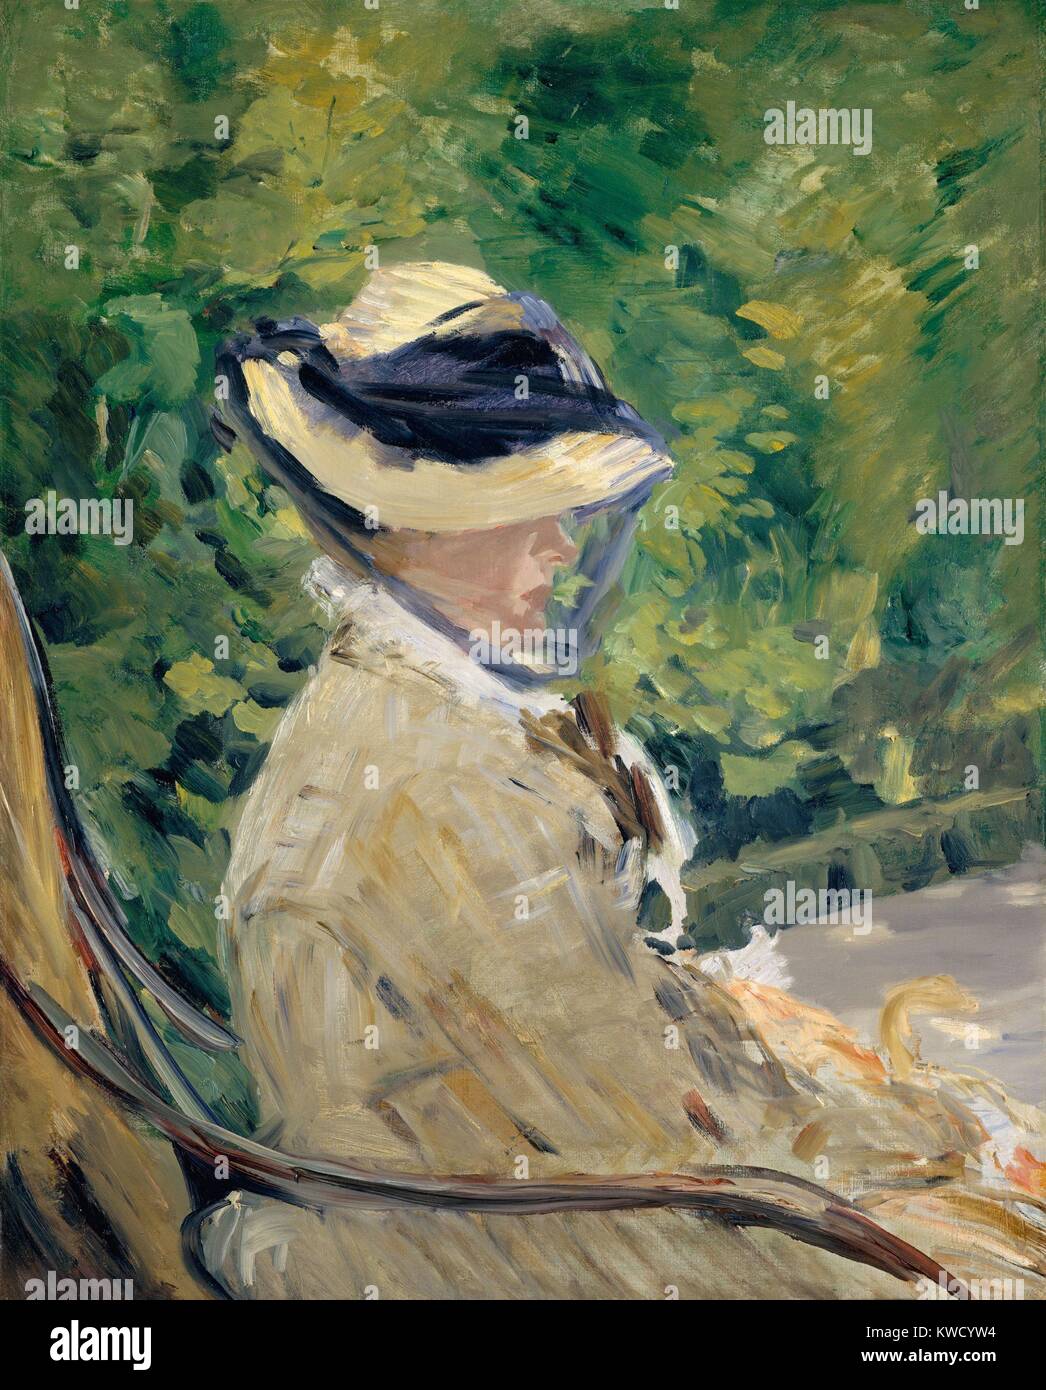 Madame Manet (Suzanne Leenhoff), by Edouard Manet, 1880 French impressionist oil painting. The portrait was painted in the Bellevue suburb of Paris, in the summer of 1880 (BSLOC_2017_3_15) Stock Photo